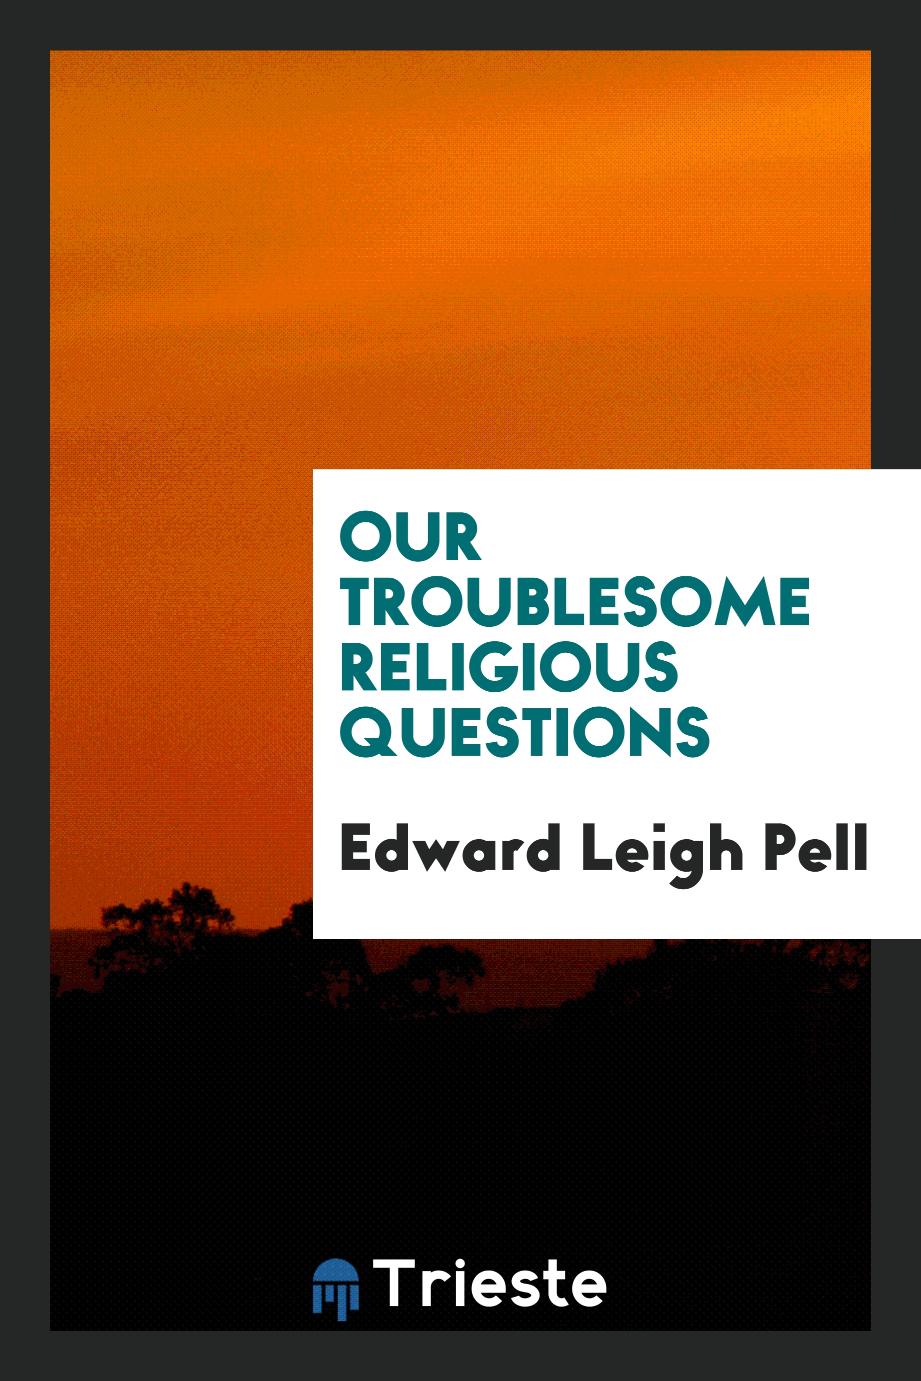 Our troublesome religious questions